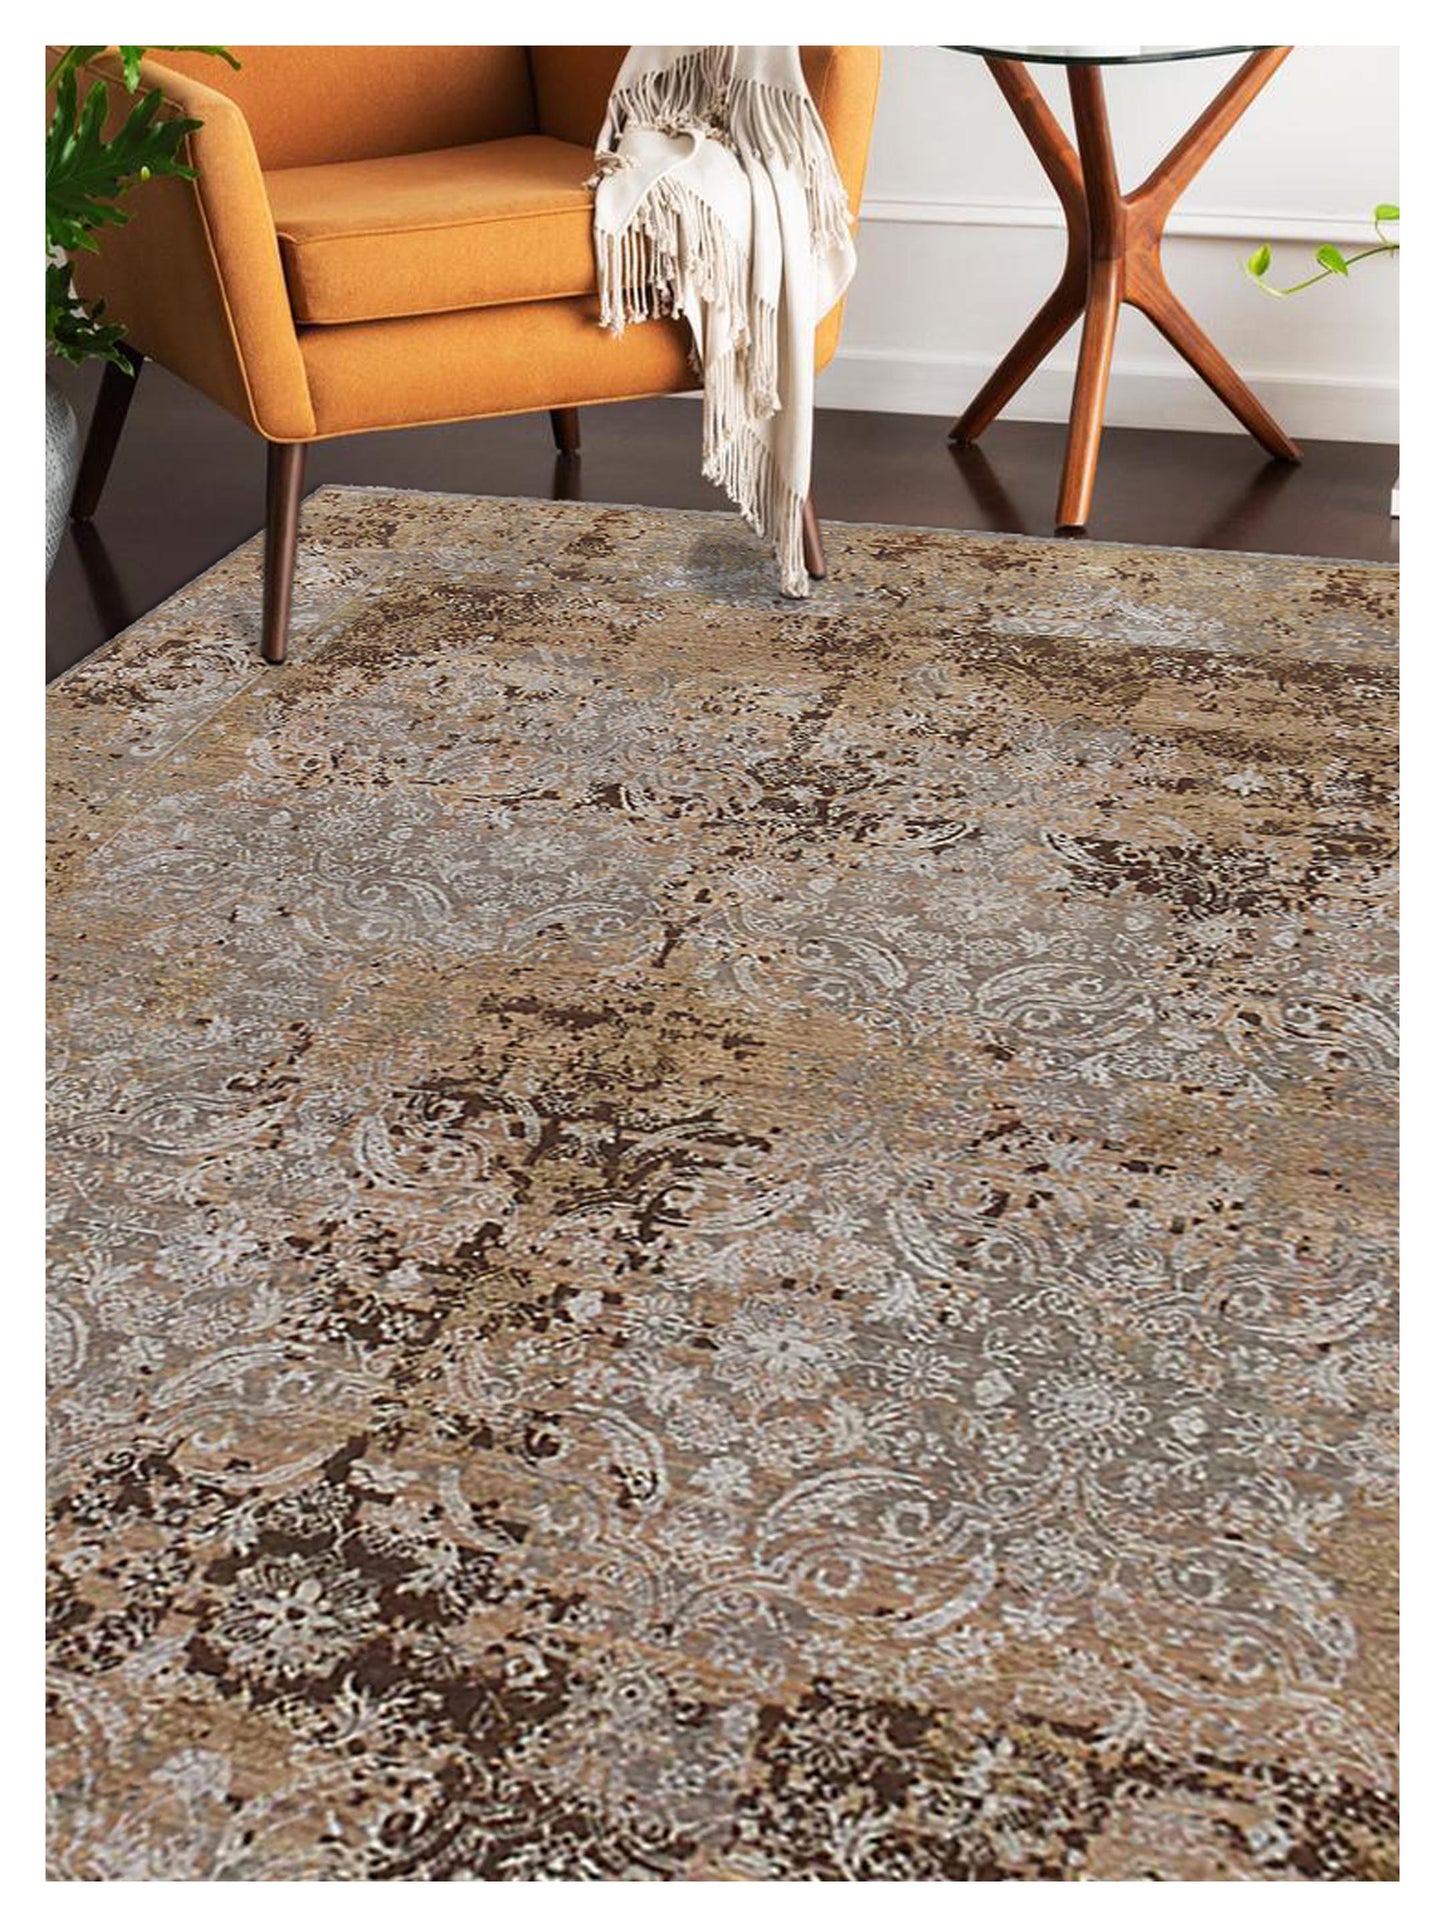 Limited PARKES PA-556 Peach  Transitional Knotted Rug